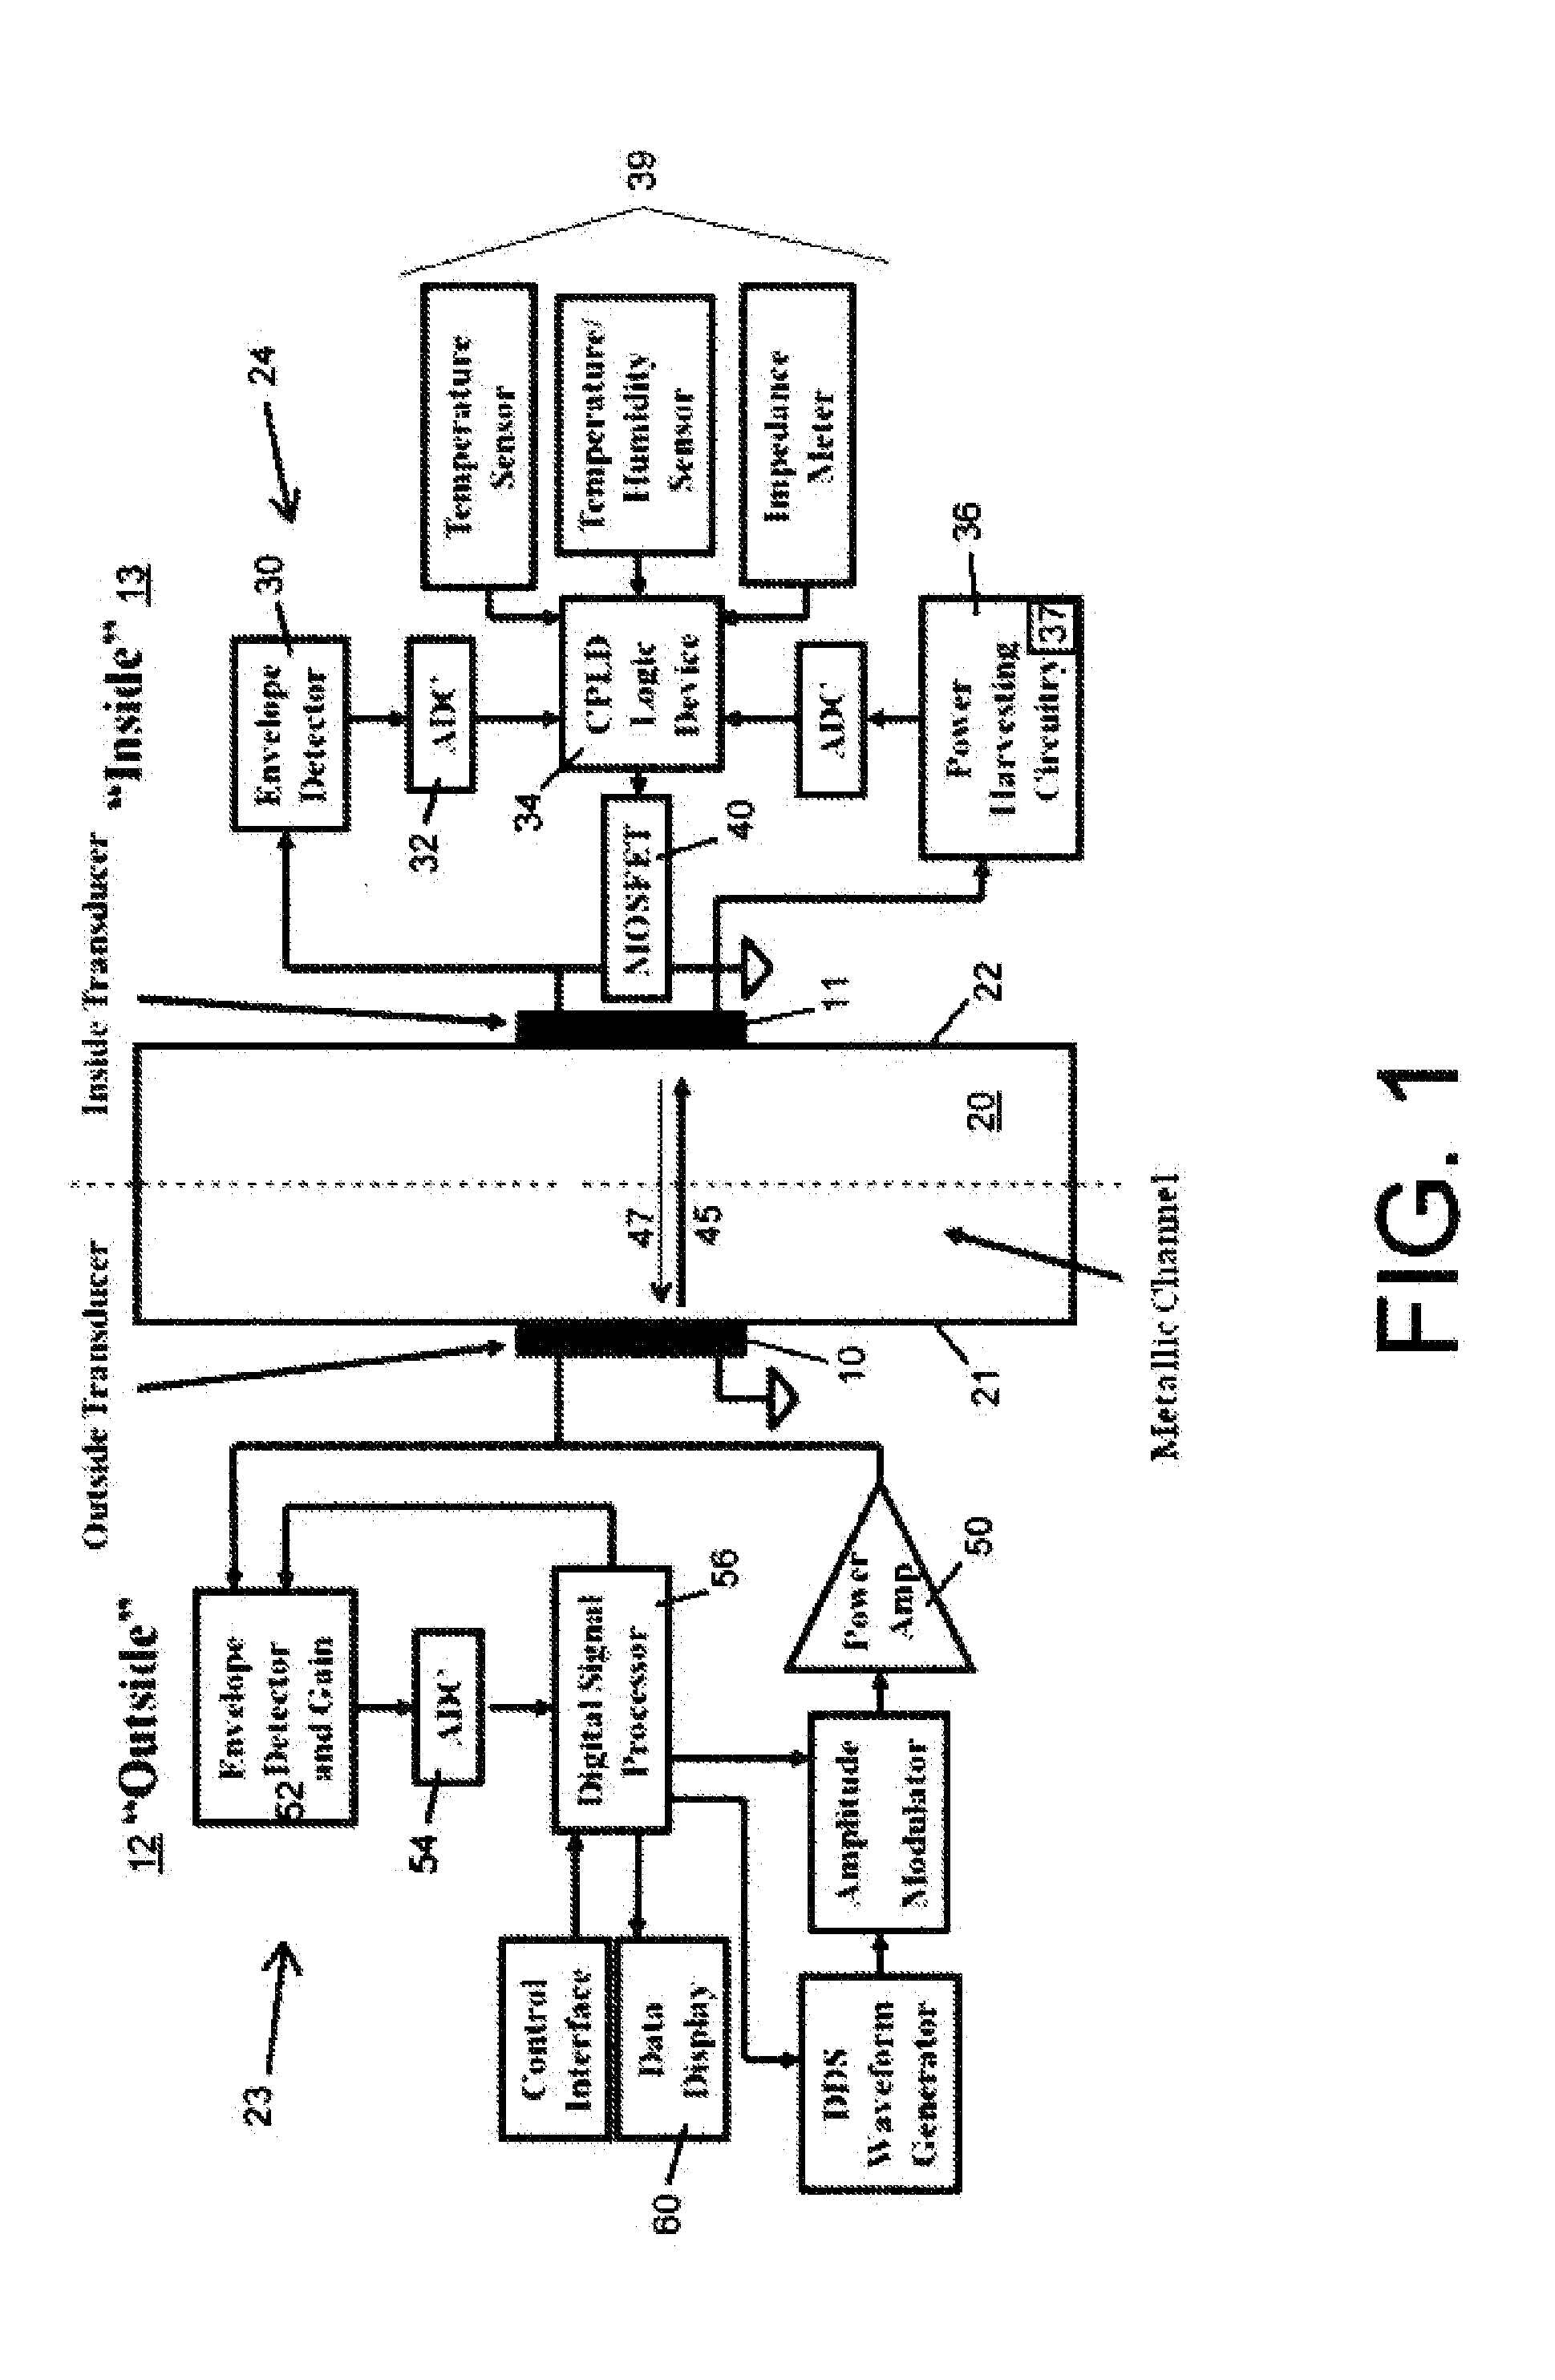 Full-duplex ultrasonic through-wall communication and power delivery system with frequency tracking